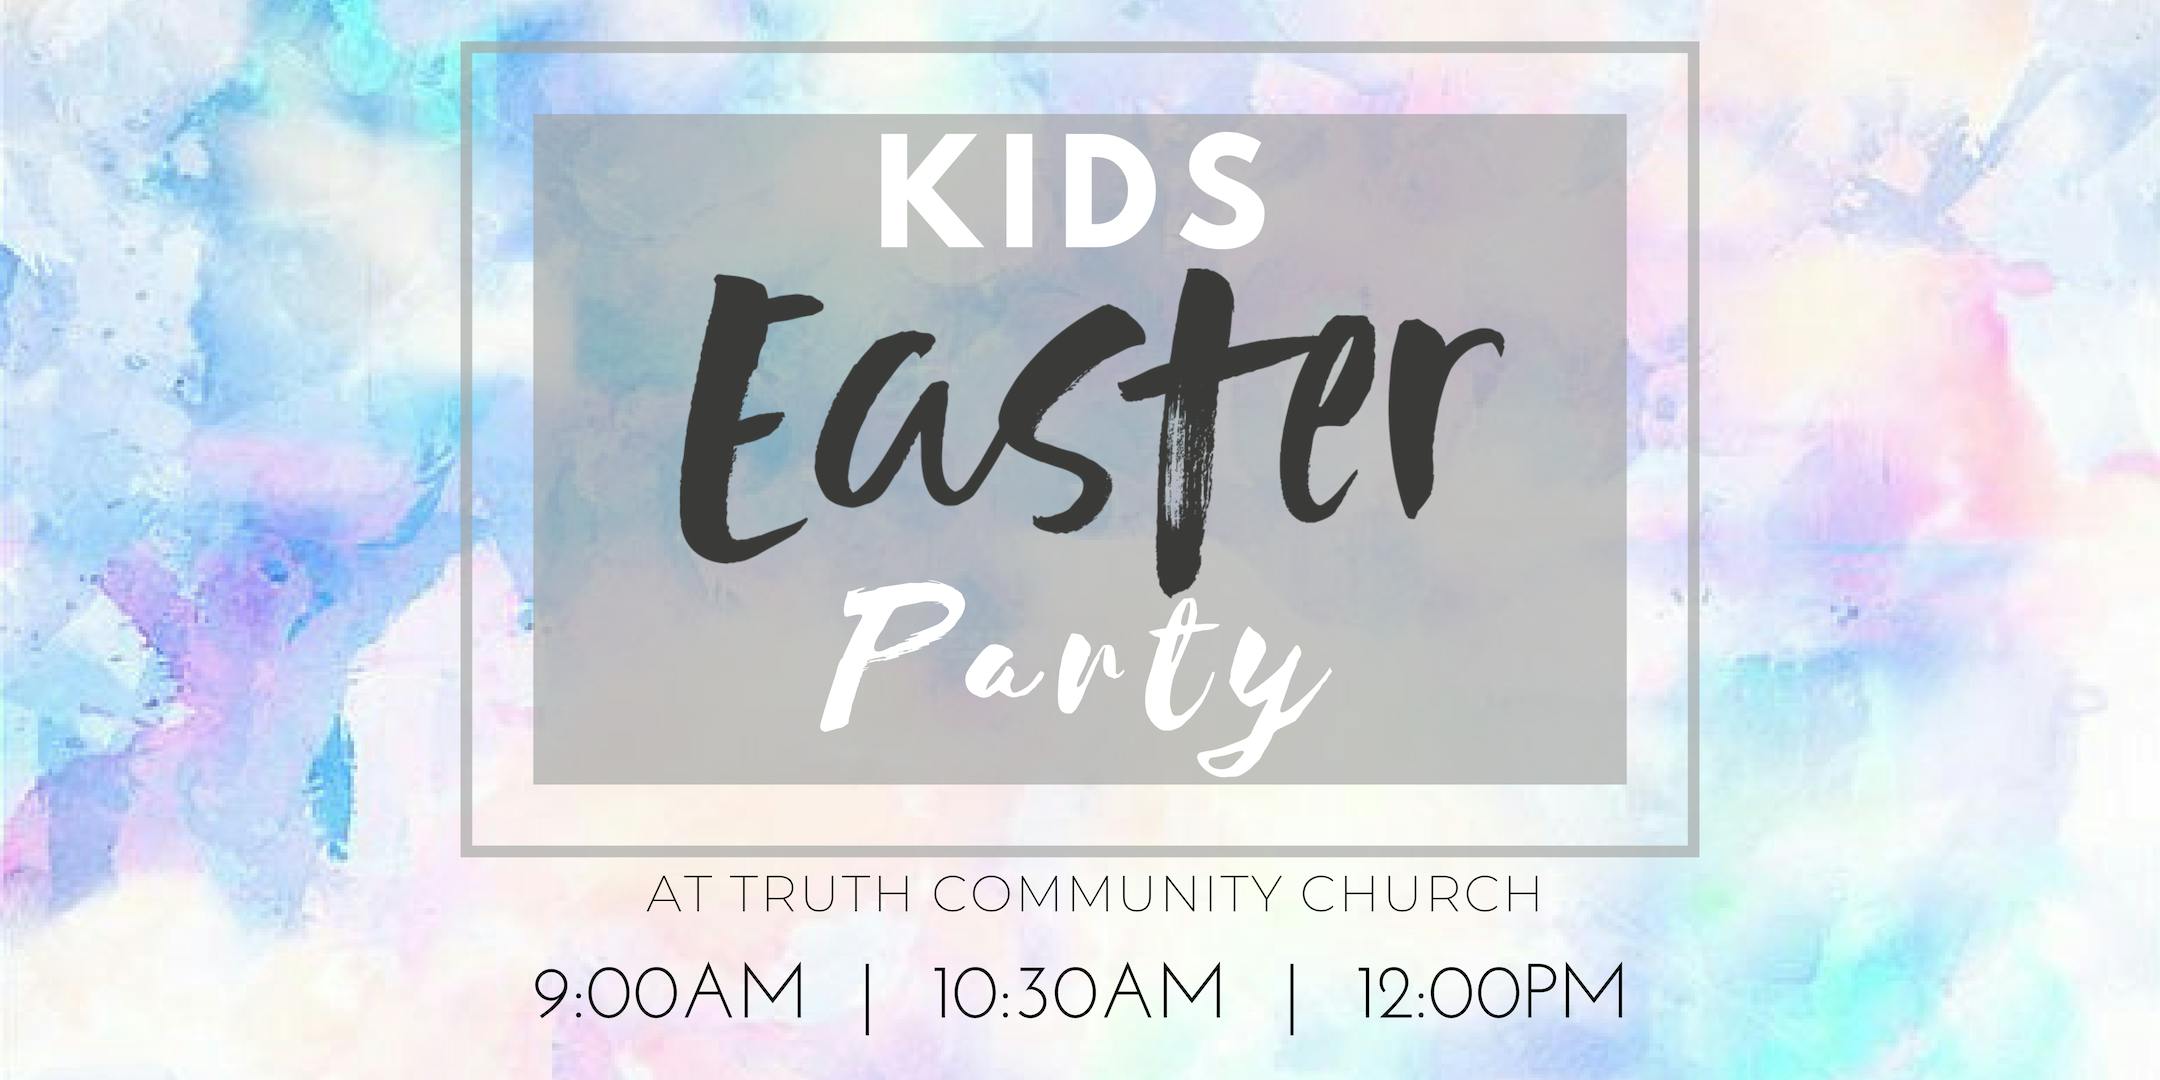 Kids Easter Party 2019